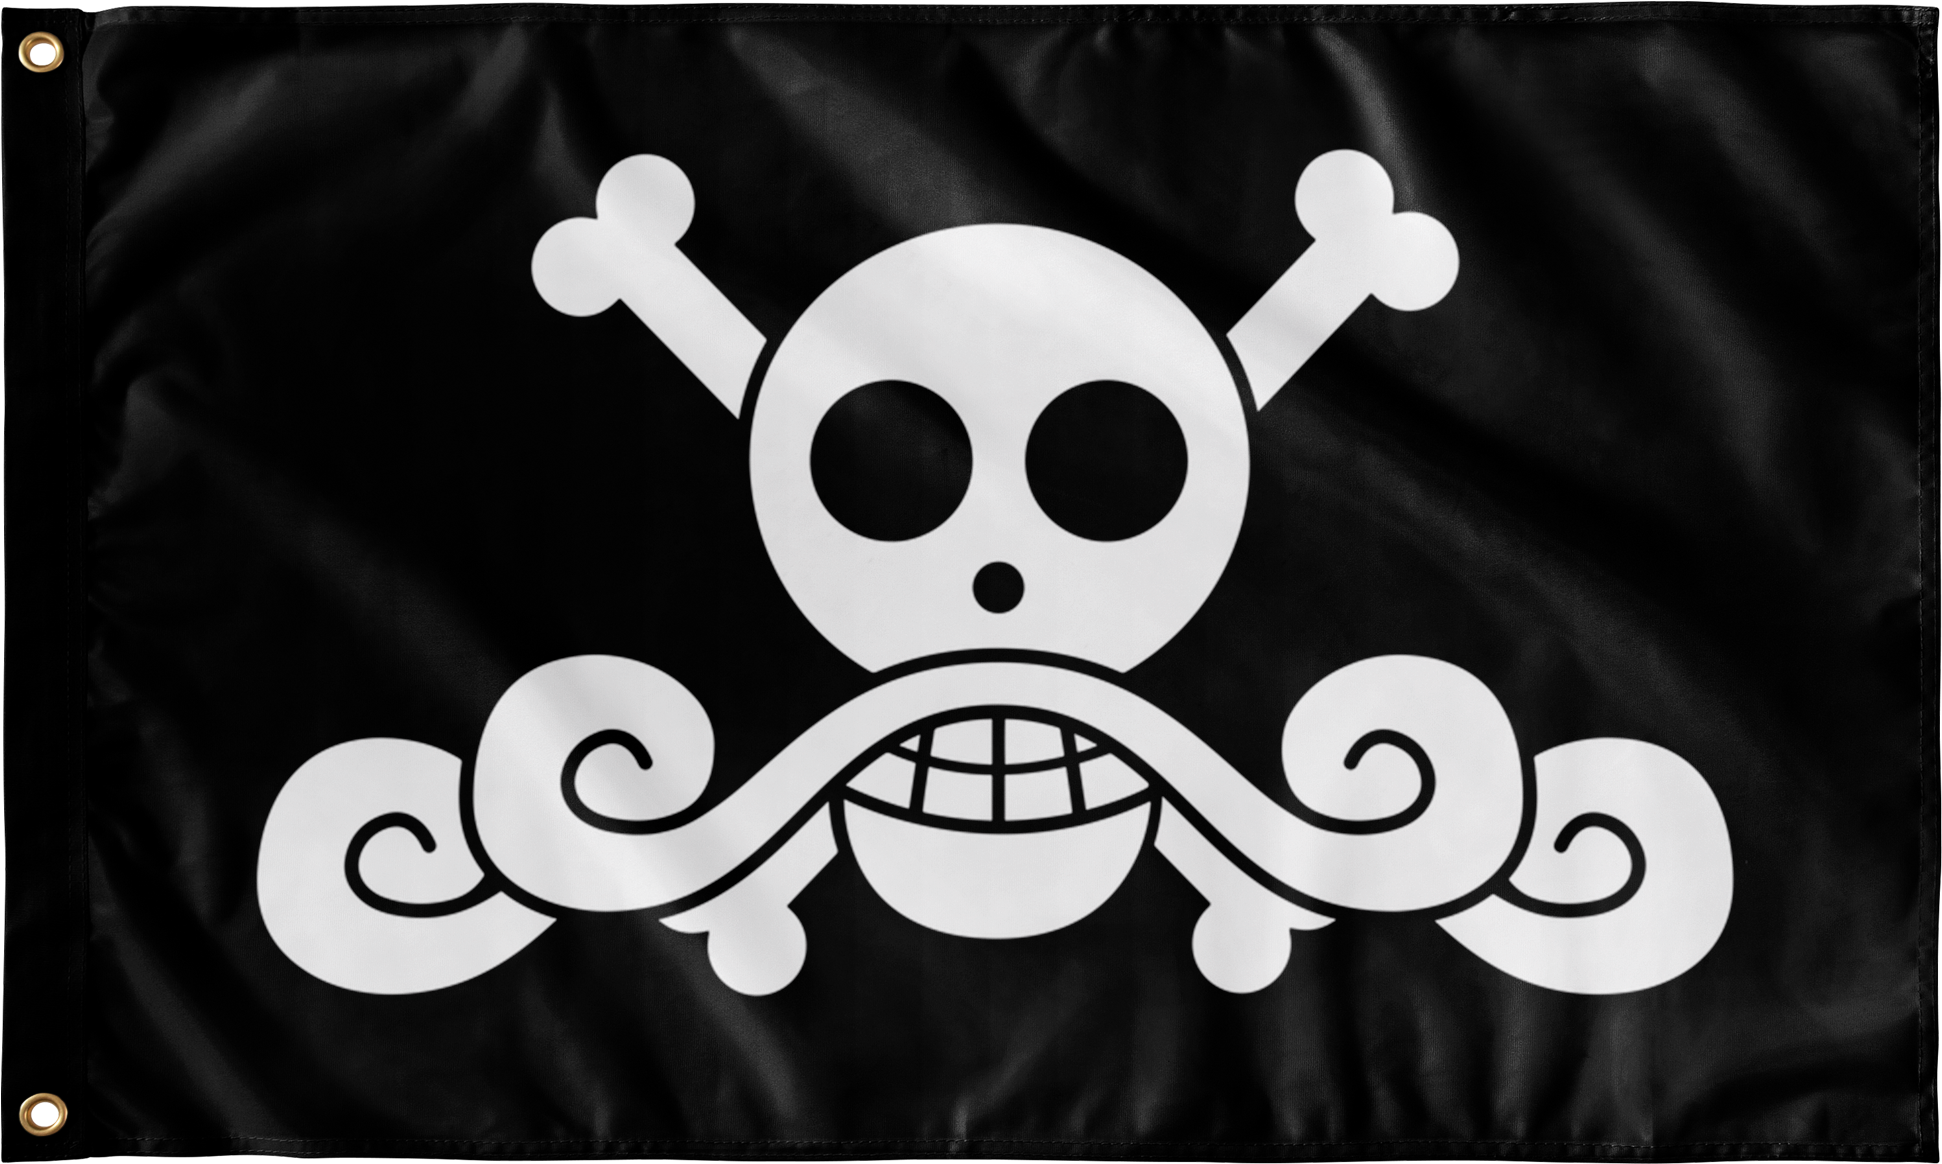 A Black And White Flag With A Skull And Crossbones